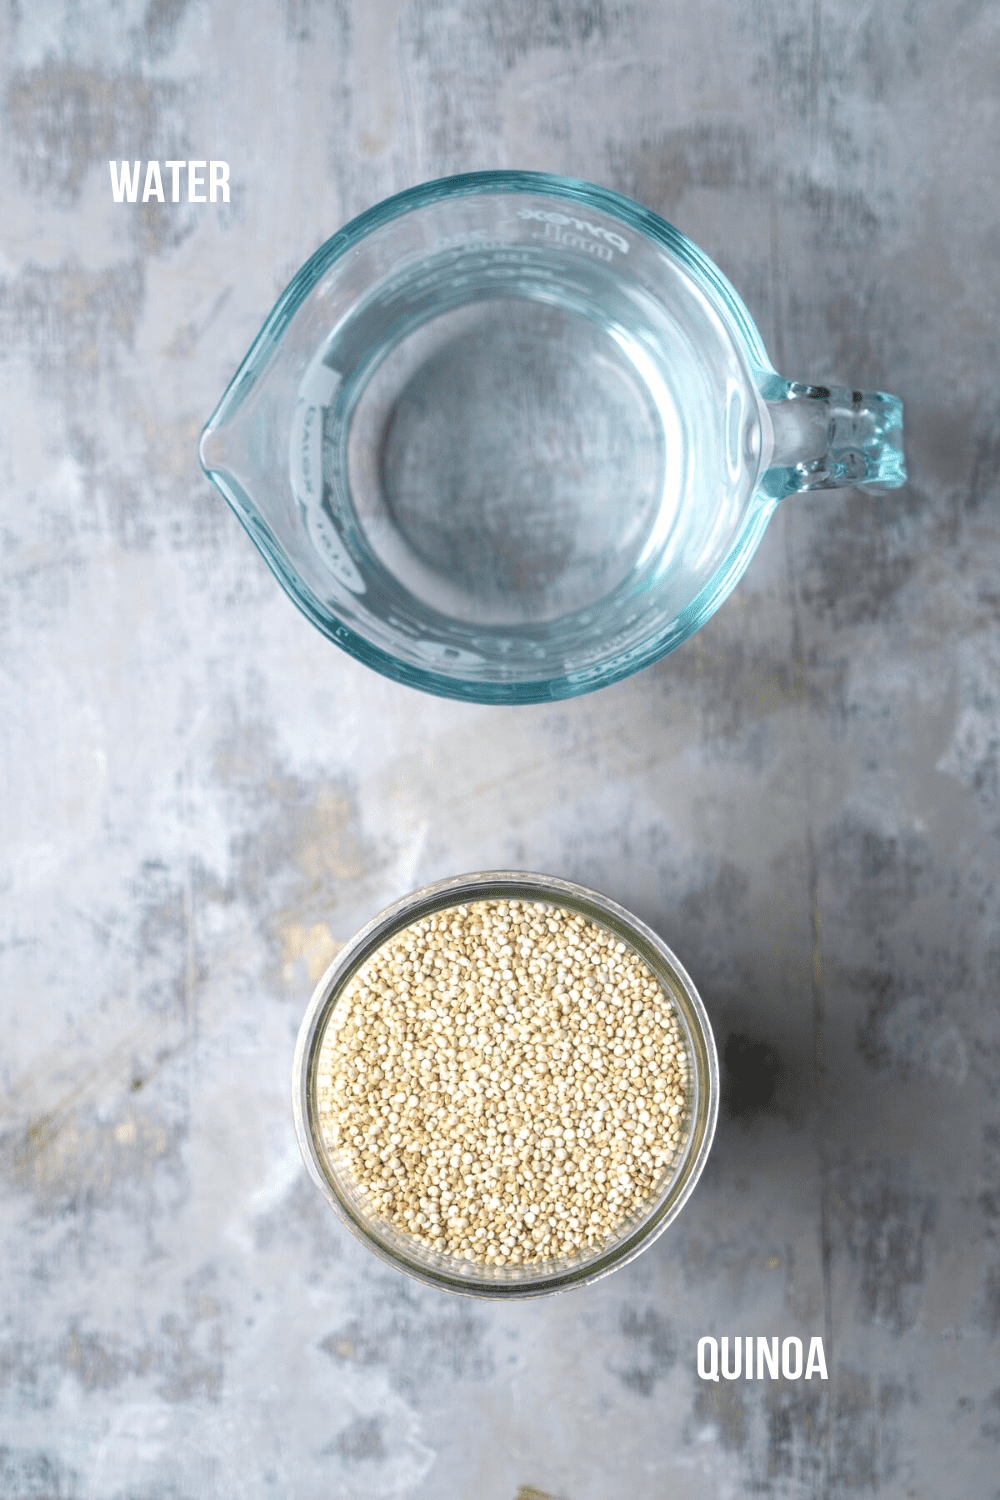 dry quinoa in glass jar next to water in glass measure cup